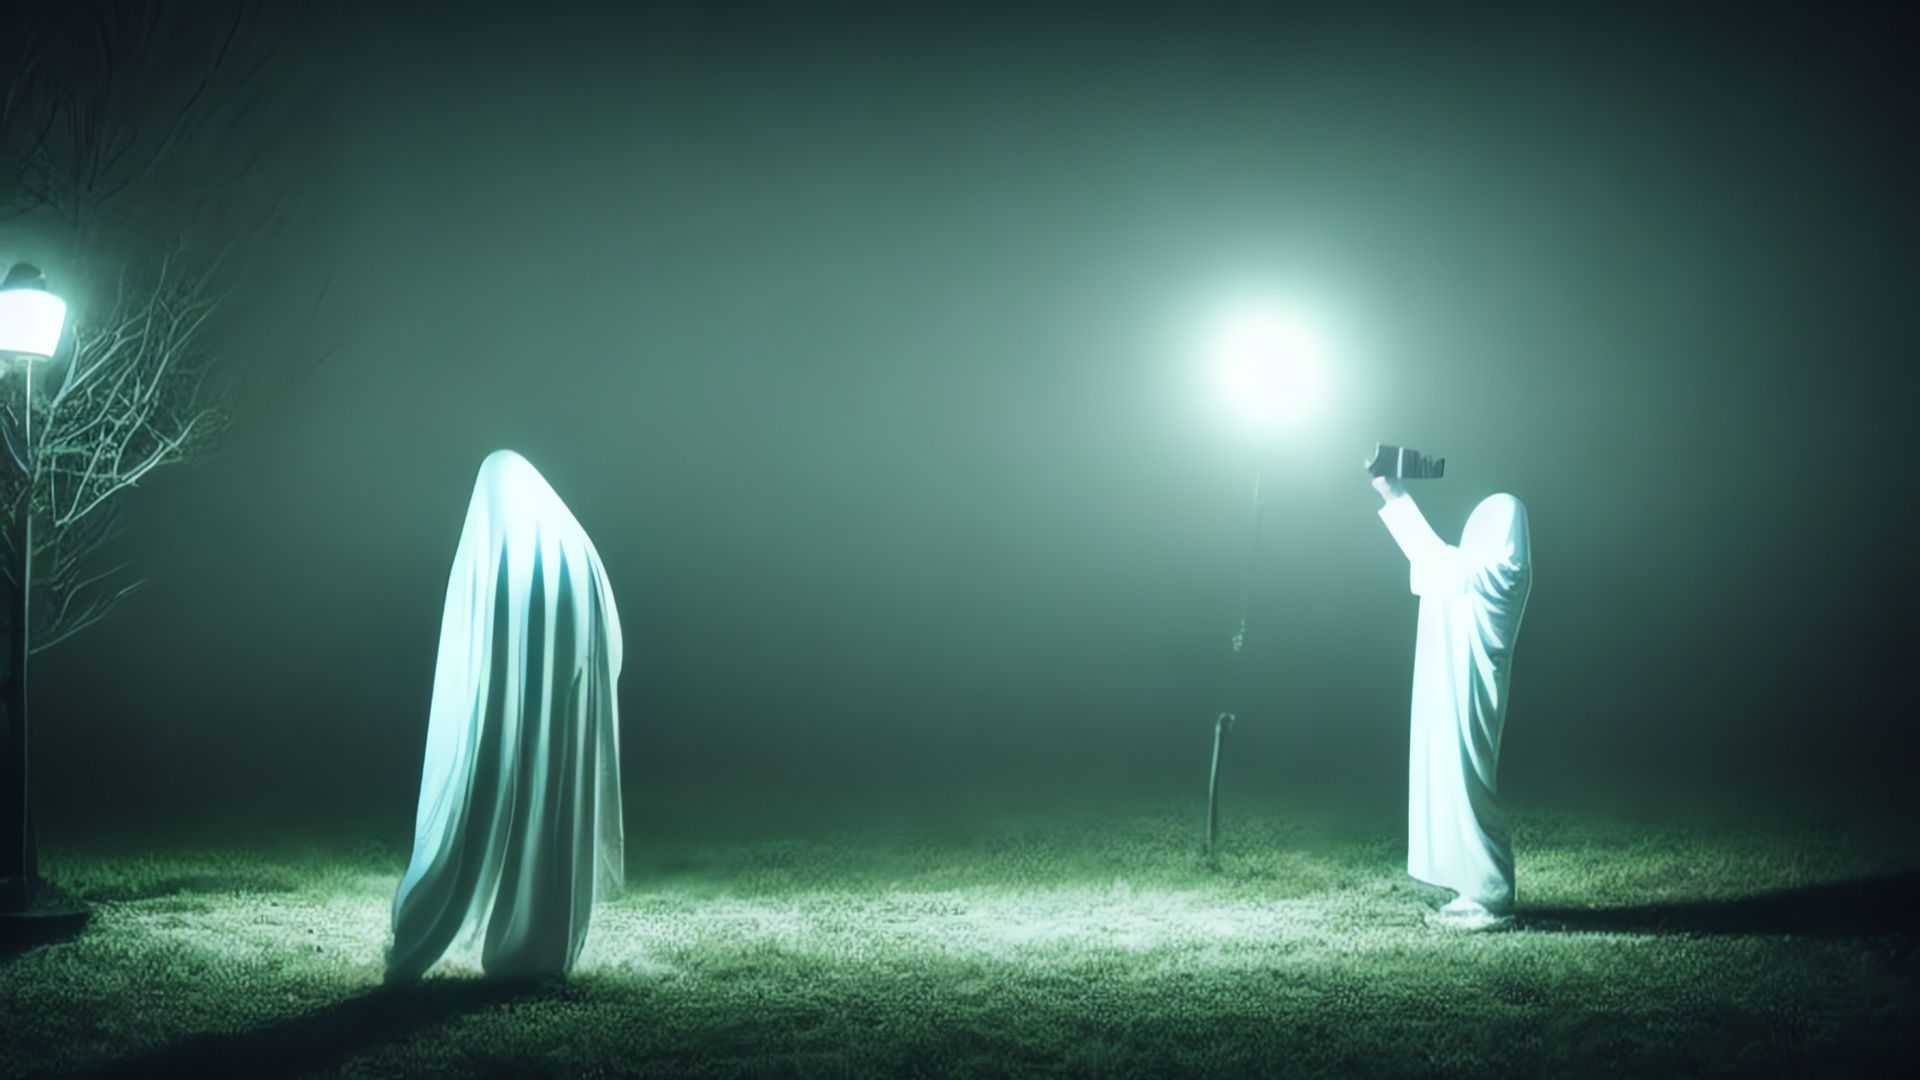 Artificial intelligence-generated image of two ghosts standing on a field at night. One of the ghosts is holding a large camera.